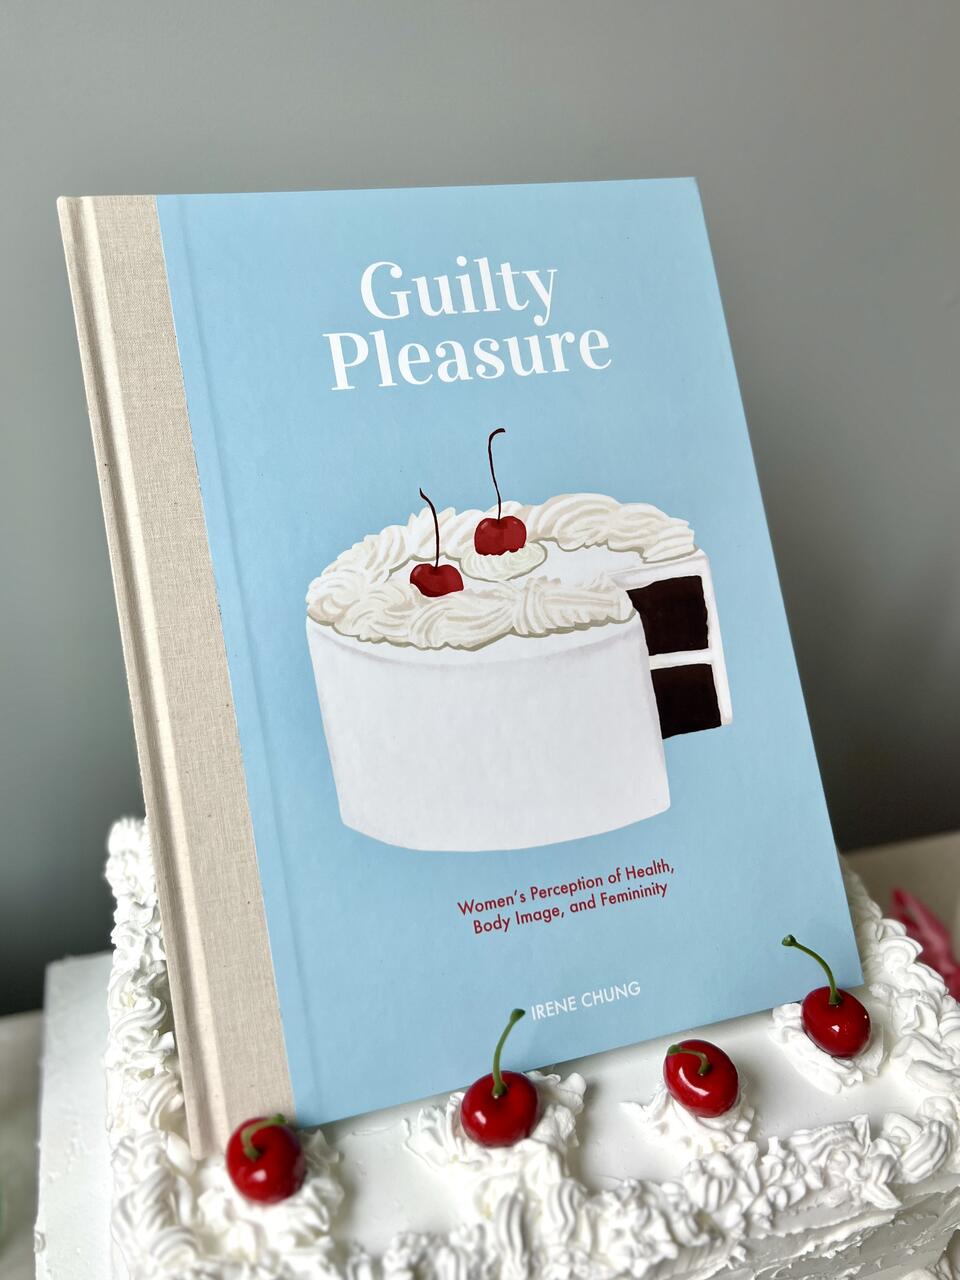 an illustrated book, titled Guilty Pleasure, sitting on a cake with cherries on top 